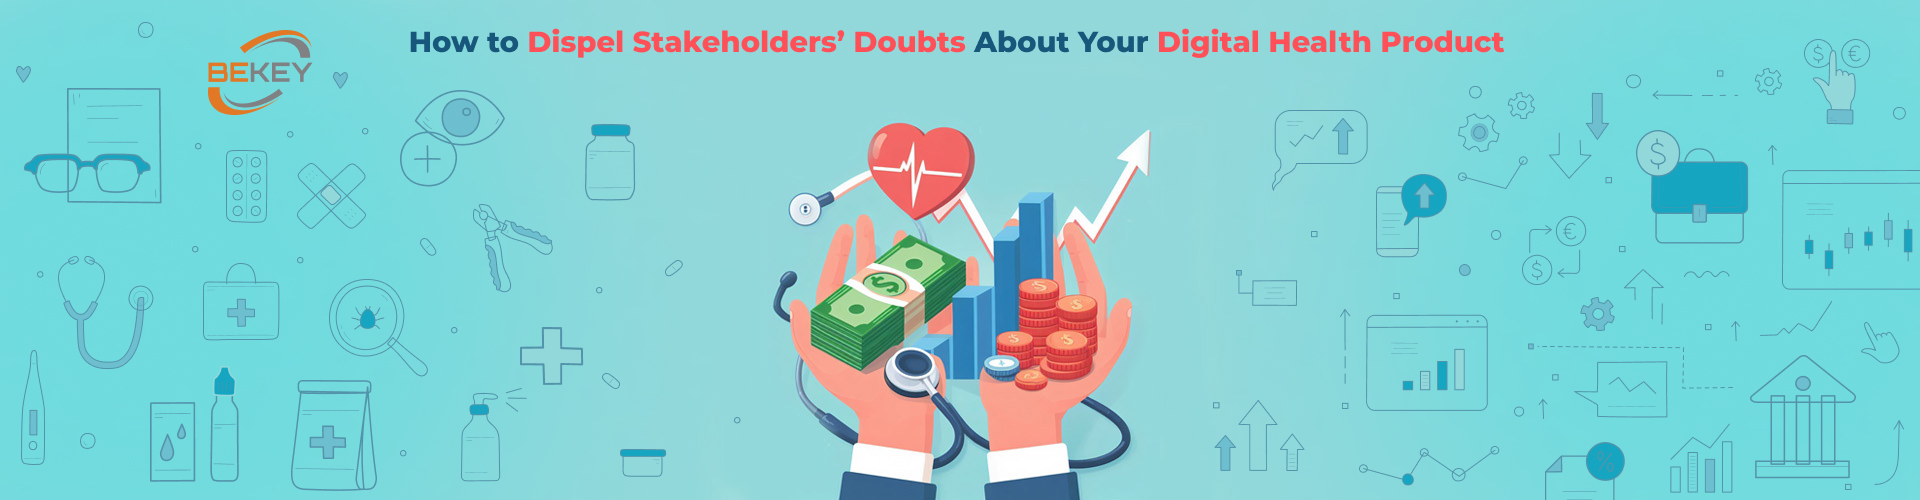 How to dispel stakeholders’ doubts about your digital health product